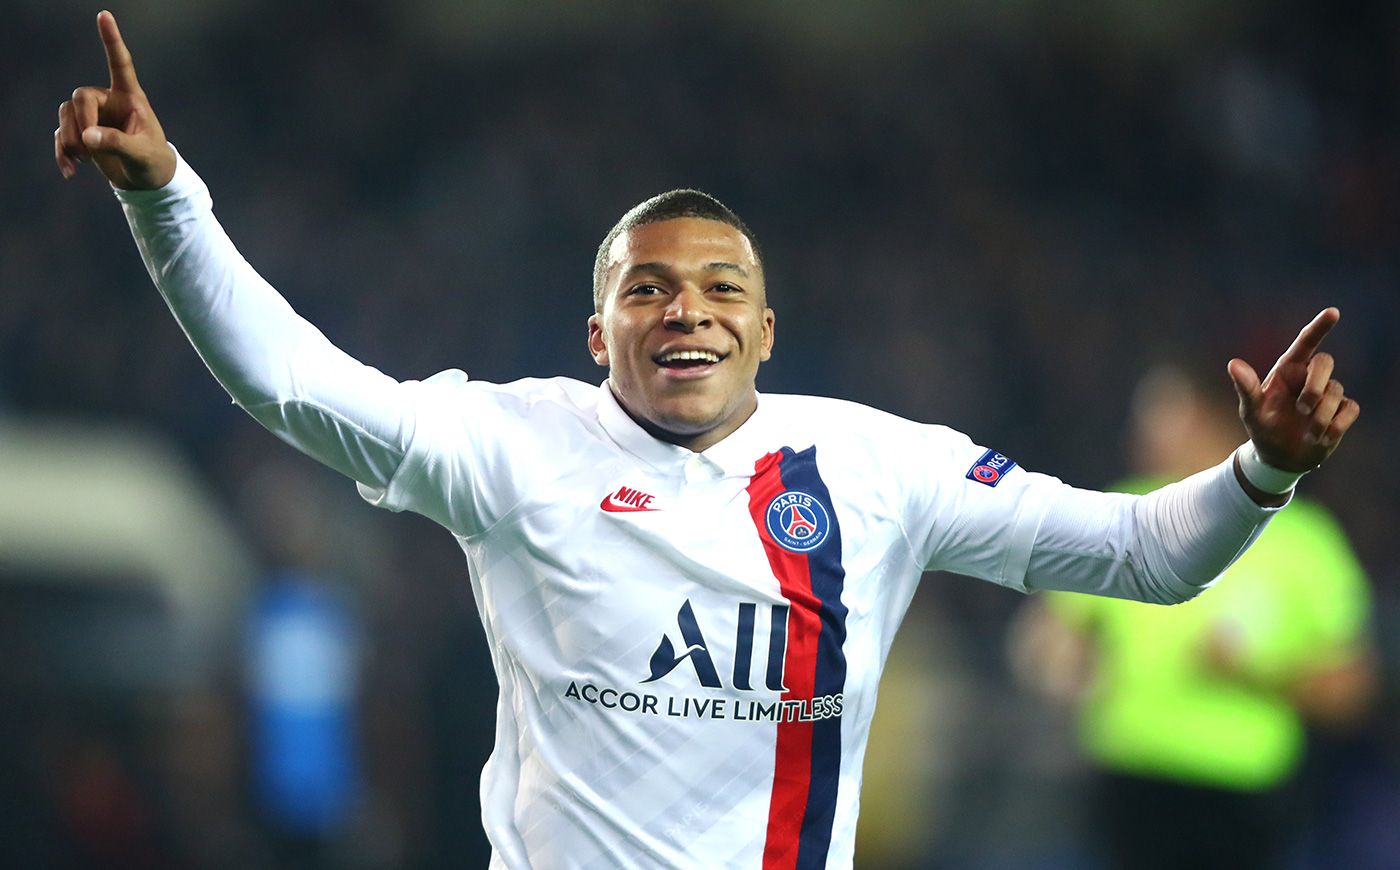 Mbappé Celebrates one of his three goals against the Witches